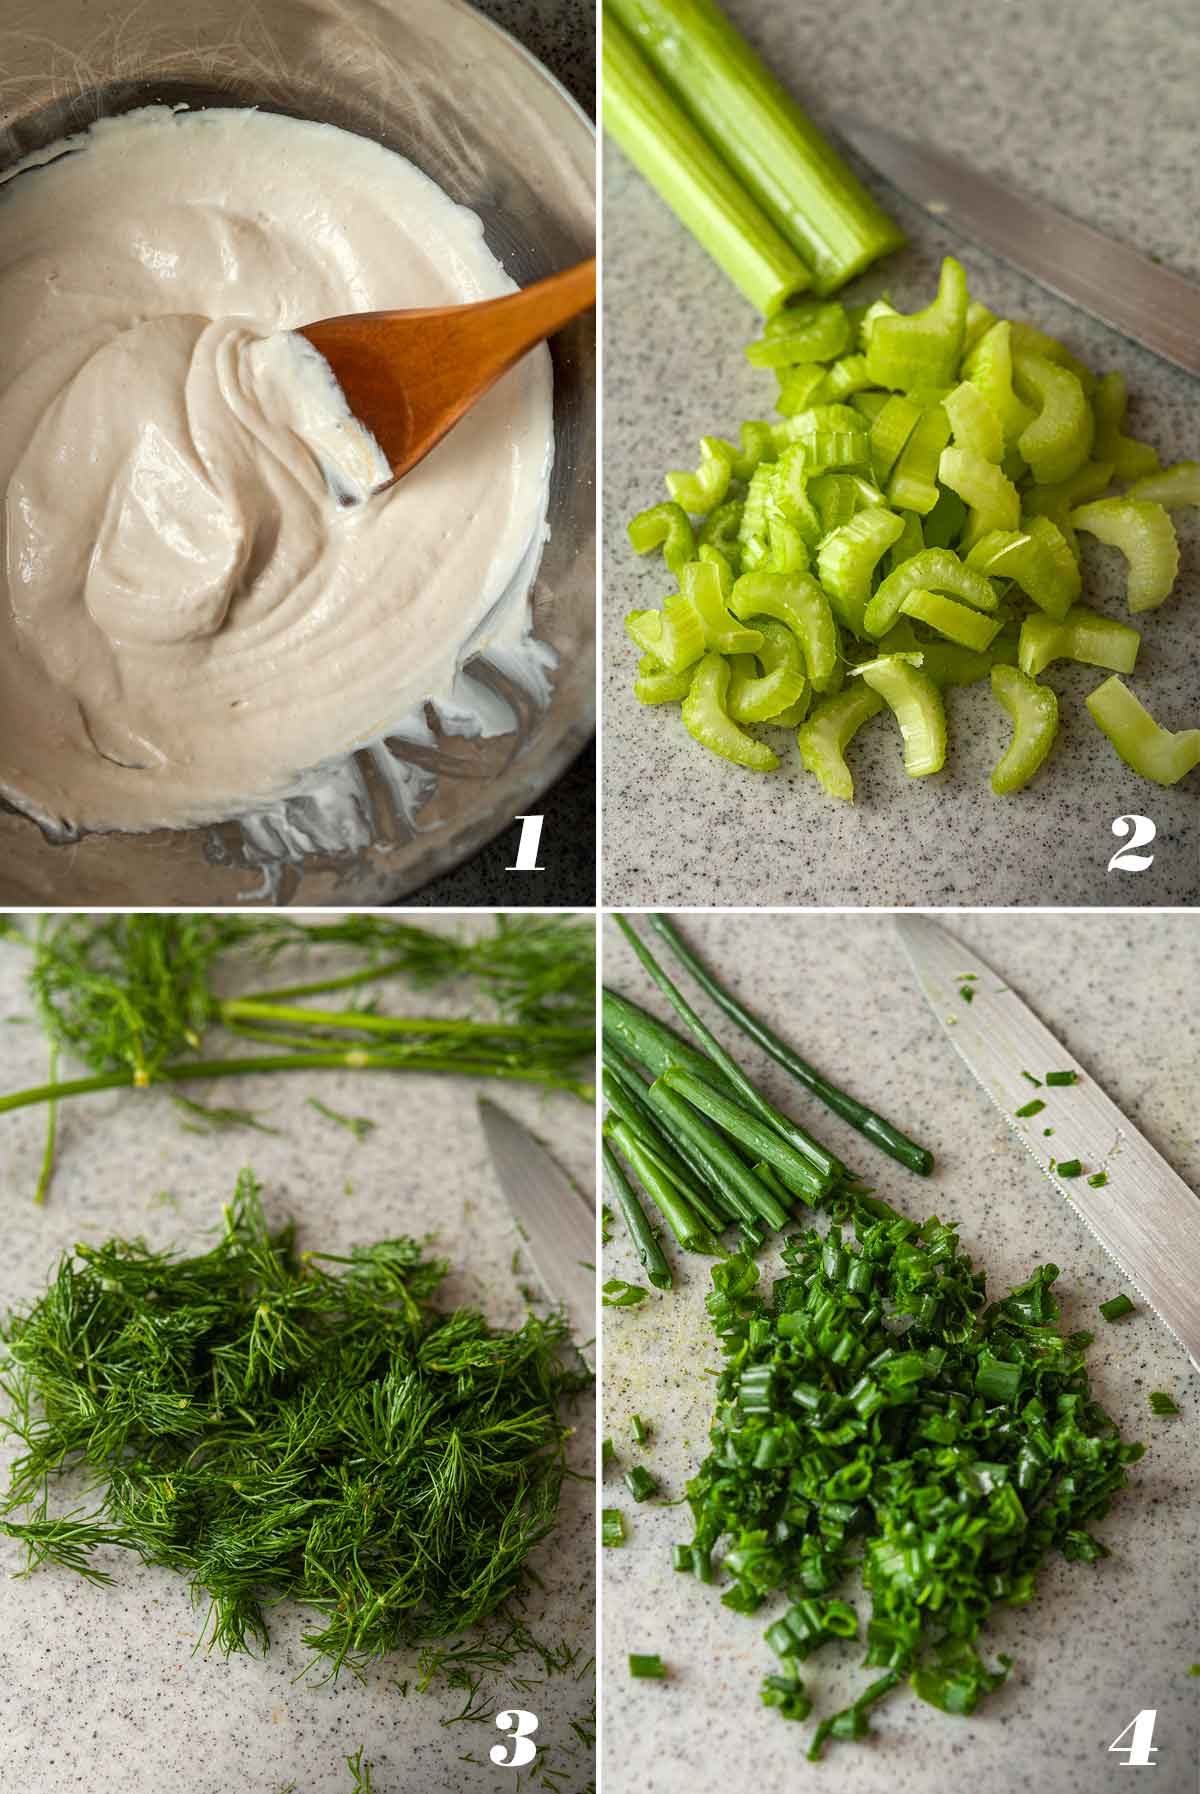 A collage of 4 numbered images showing how to prep ingredients for chickpea salad with dill.